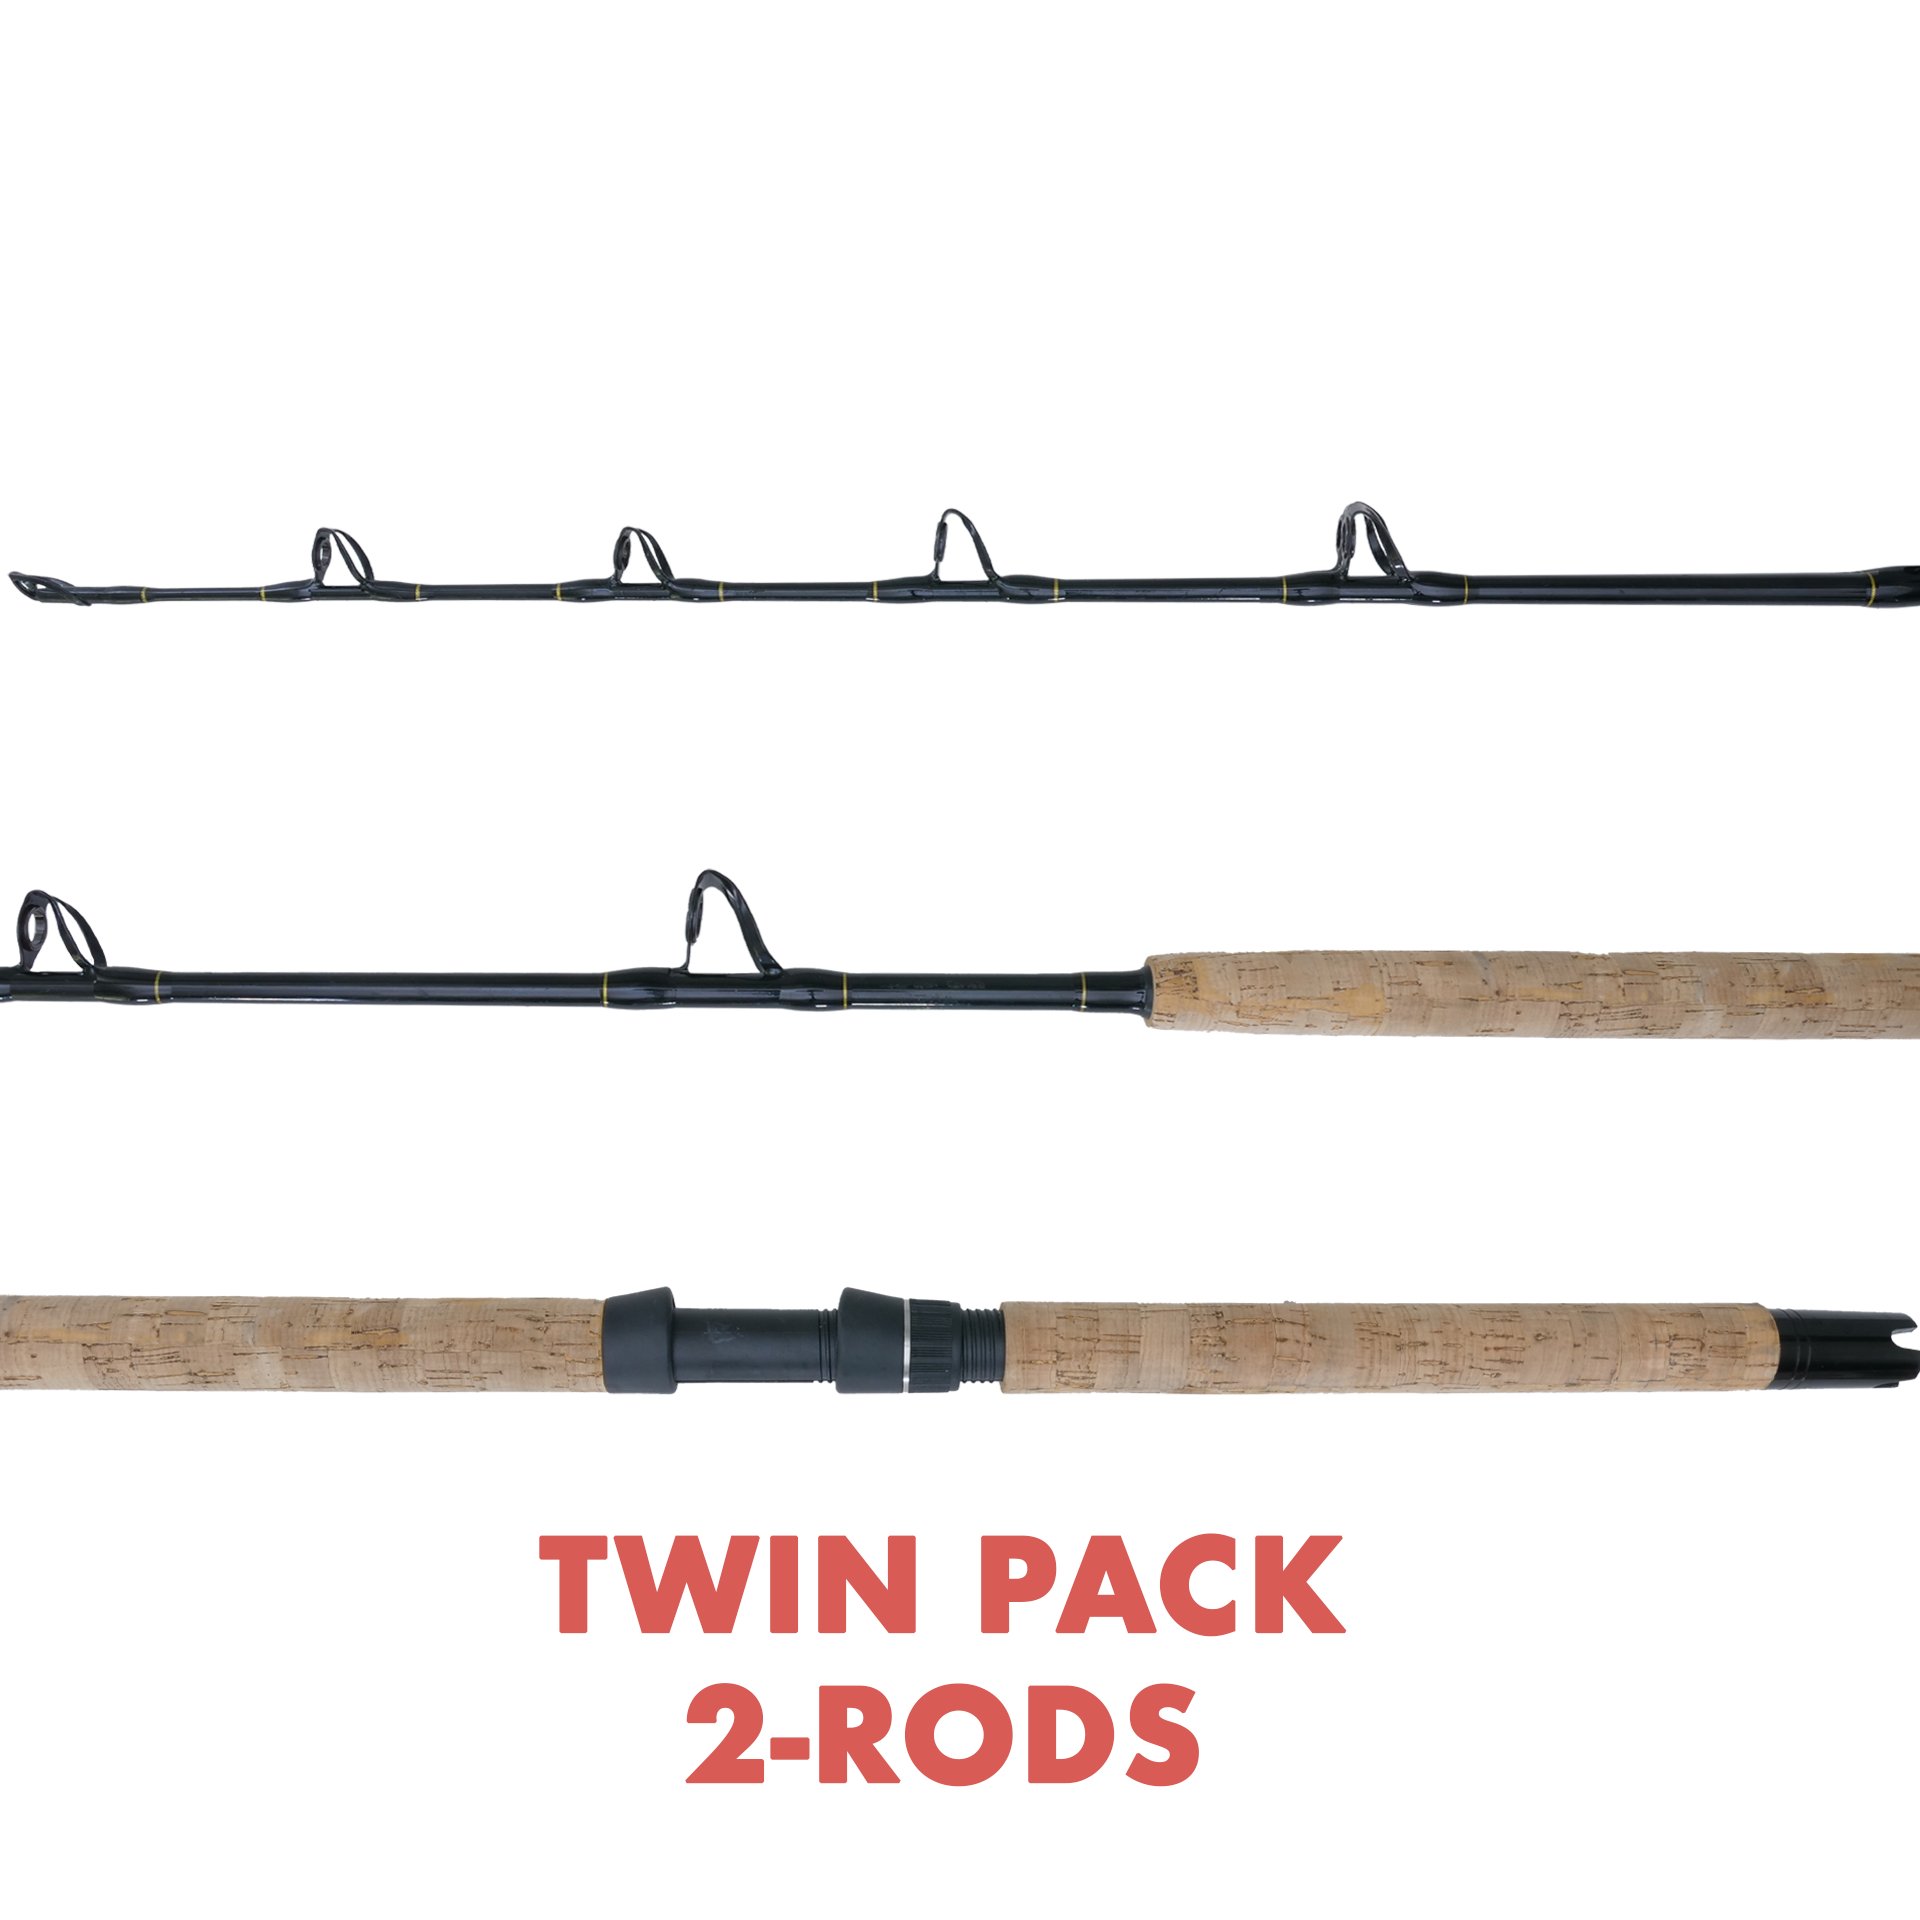 TWIN PACK Hybrid Conventional Rod: Parabolic Action 5'6" MH